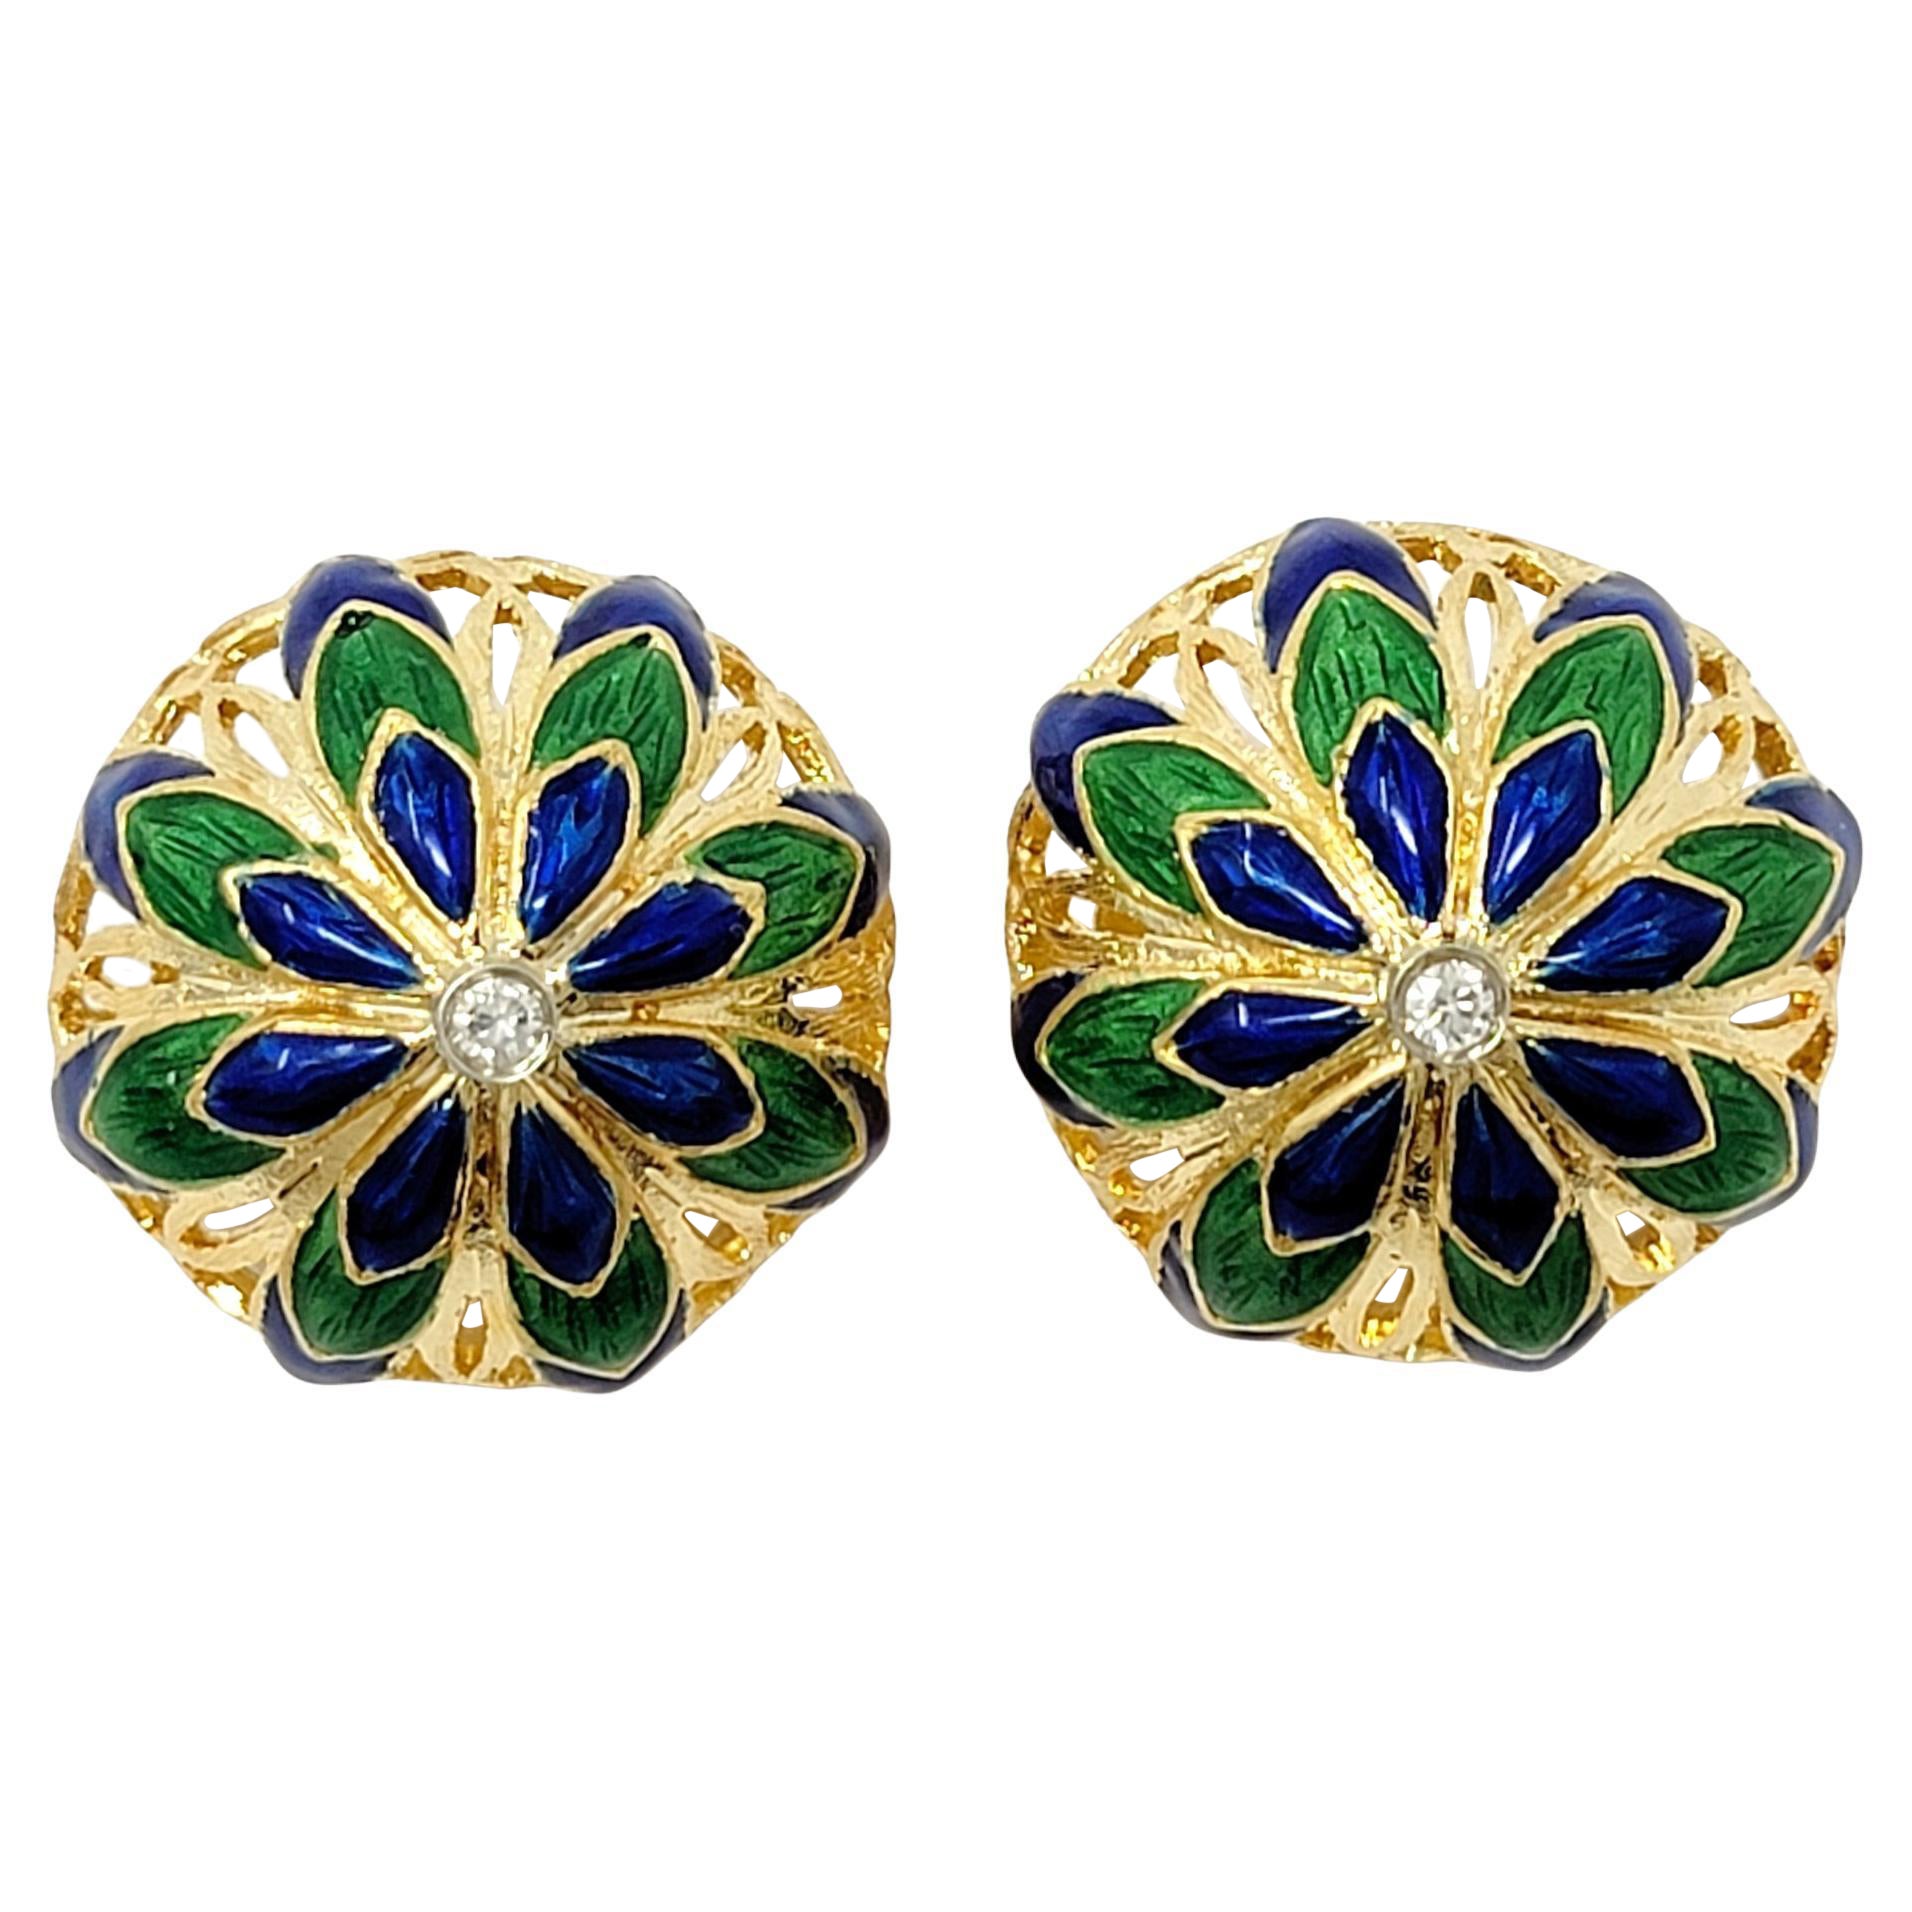 Diamond and Enamel Floral Dome Shaped 14 Karat Gold Non-Pierced Clip Earrings